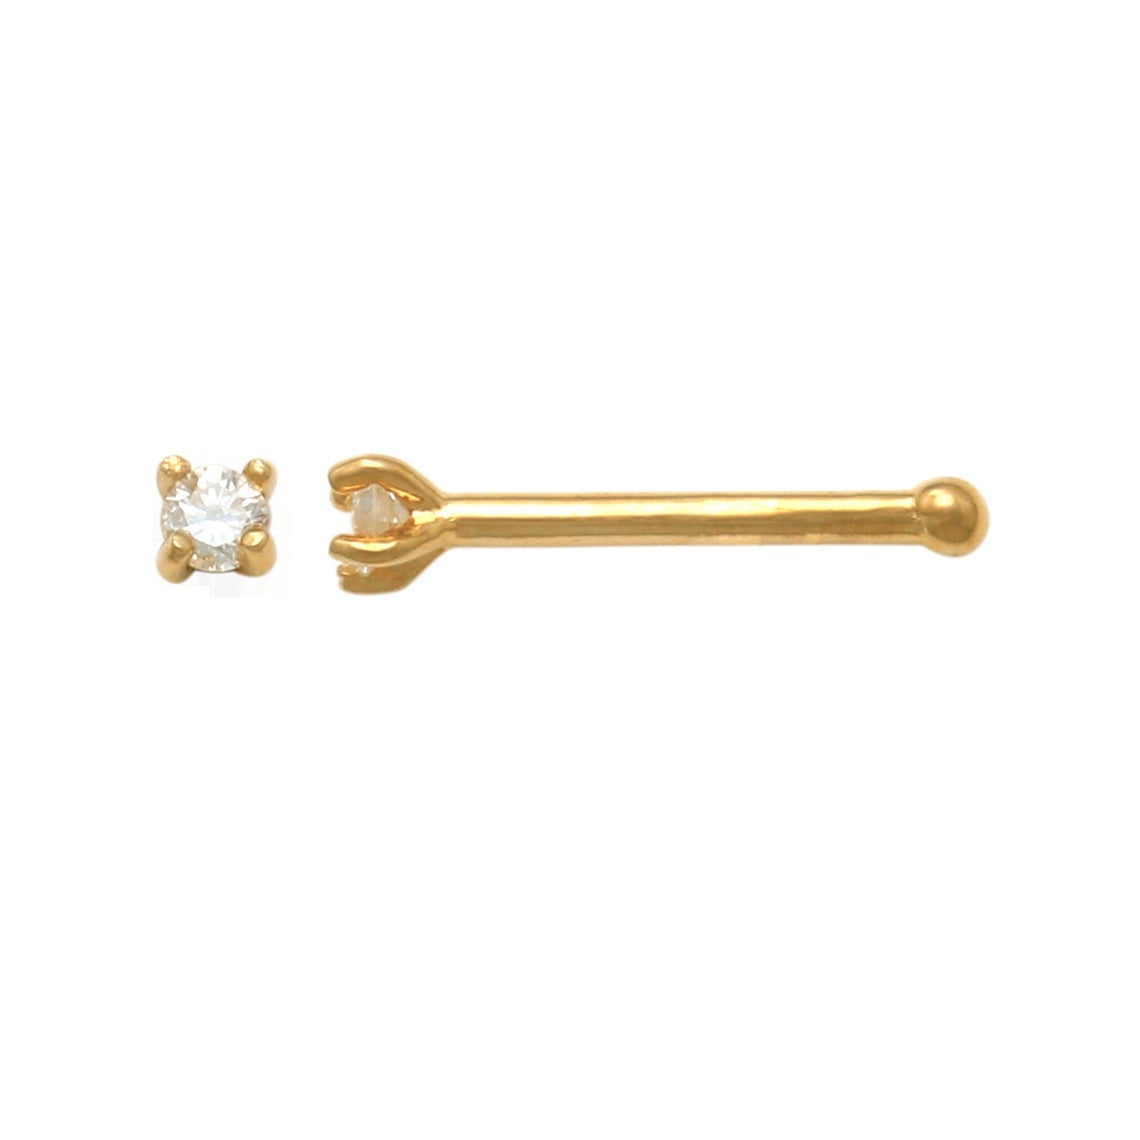 20G 1/4" 14 Karat Solid Yellow Gold Nose Bone Stud Ring with 2 mm BALL & SPIKE 